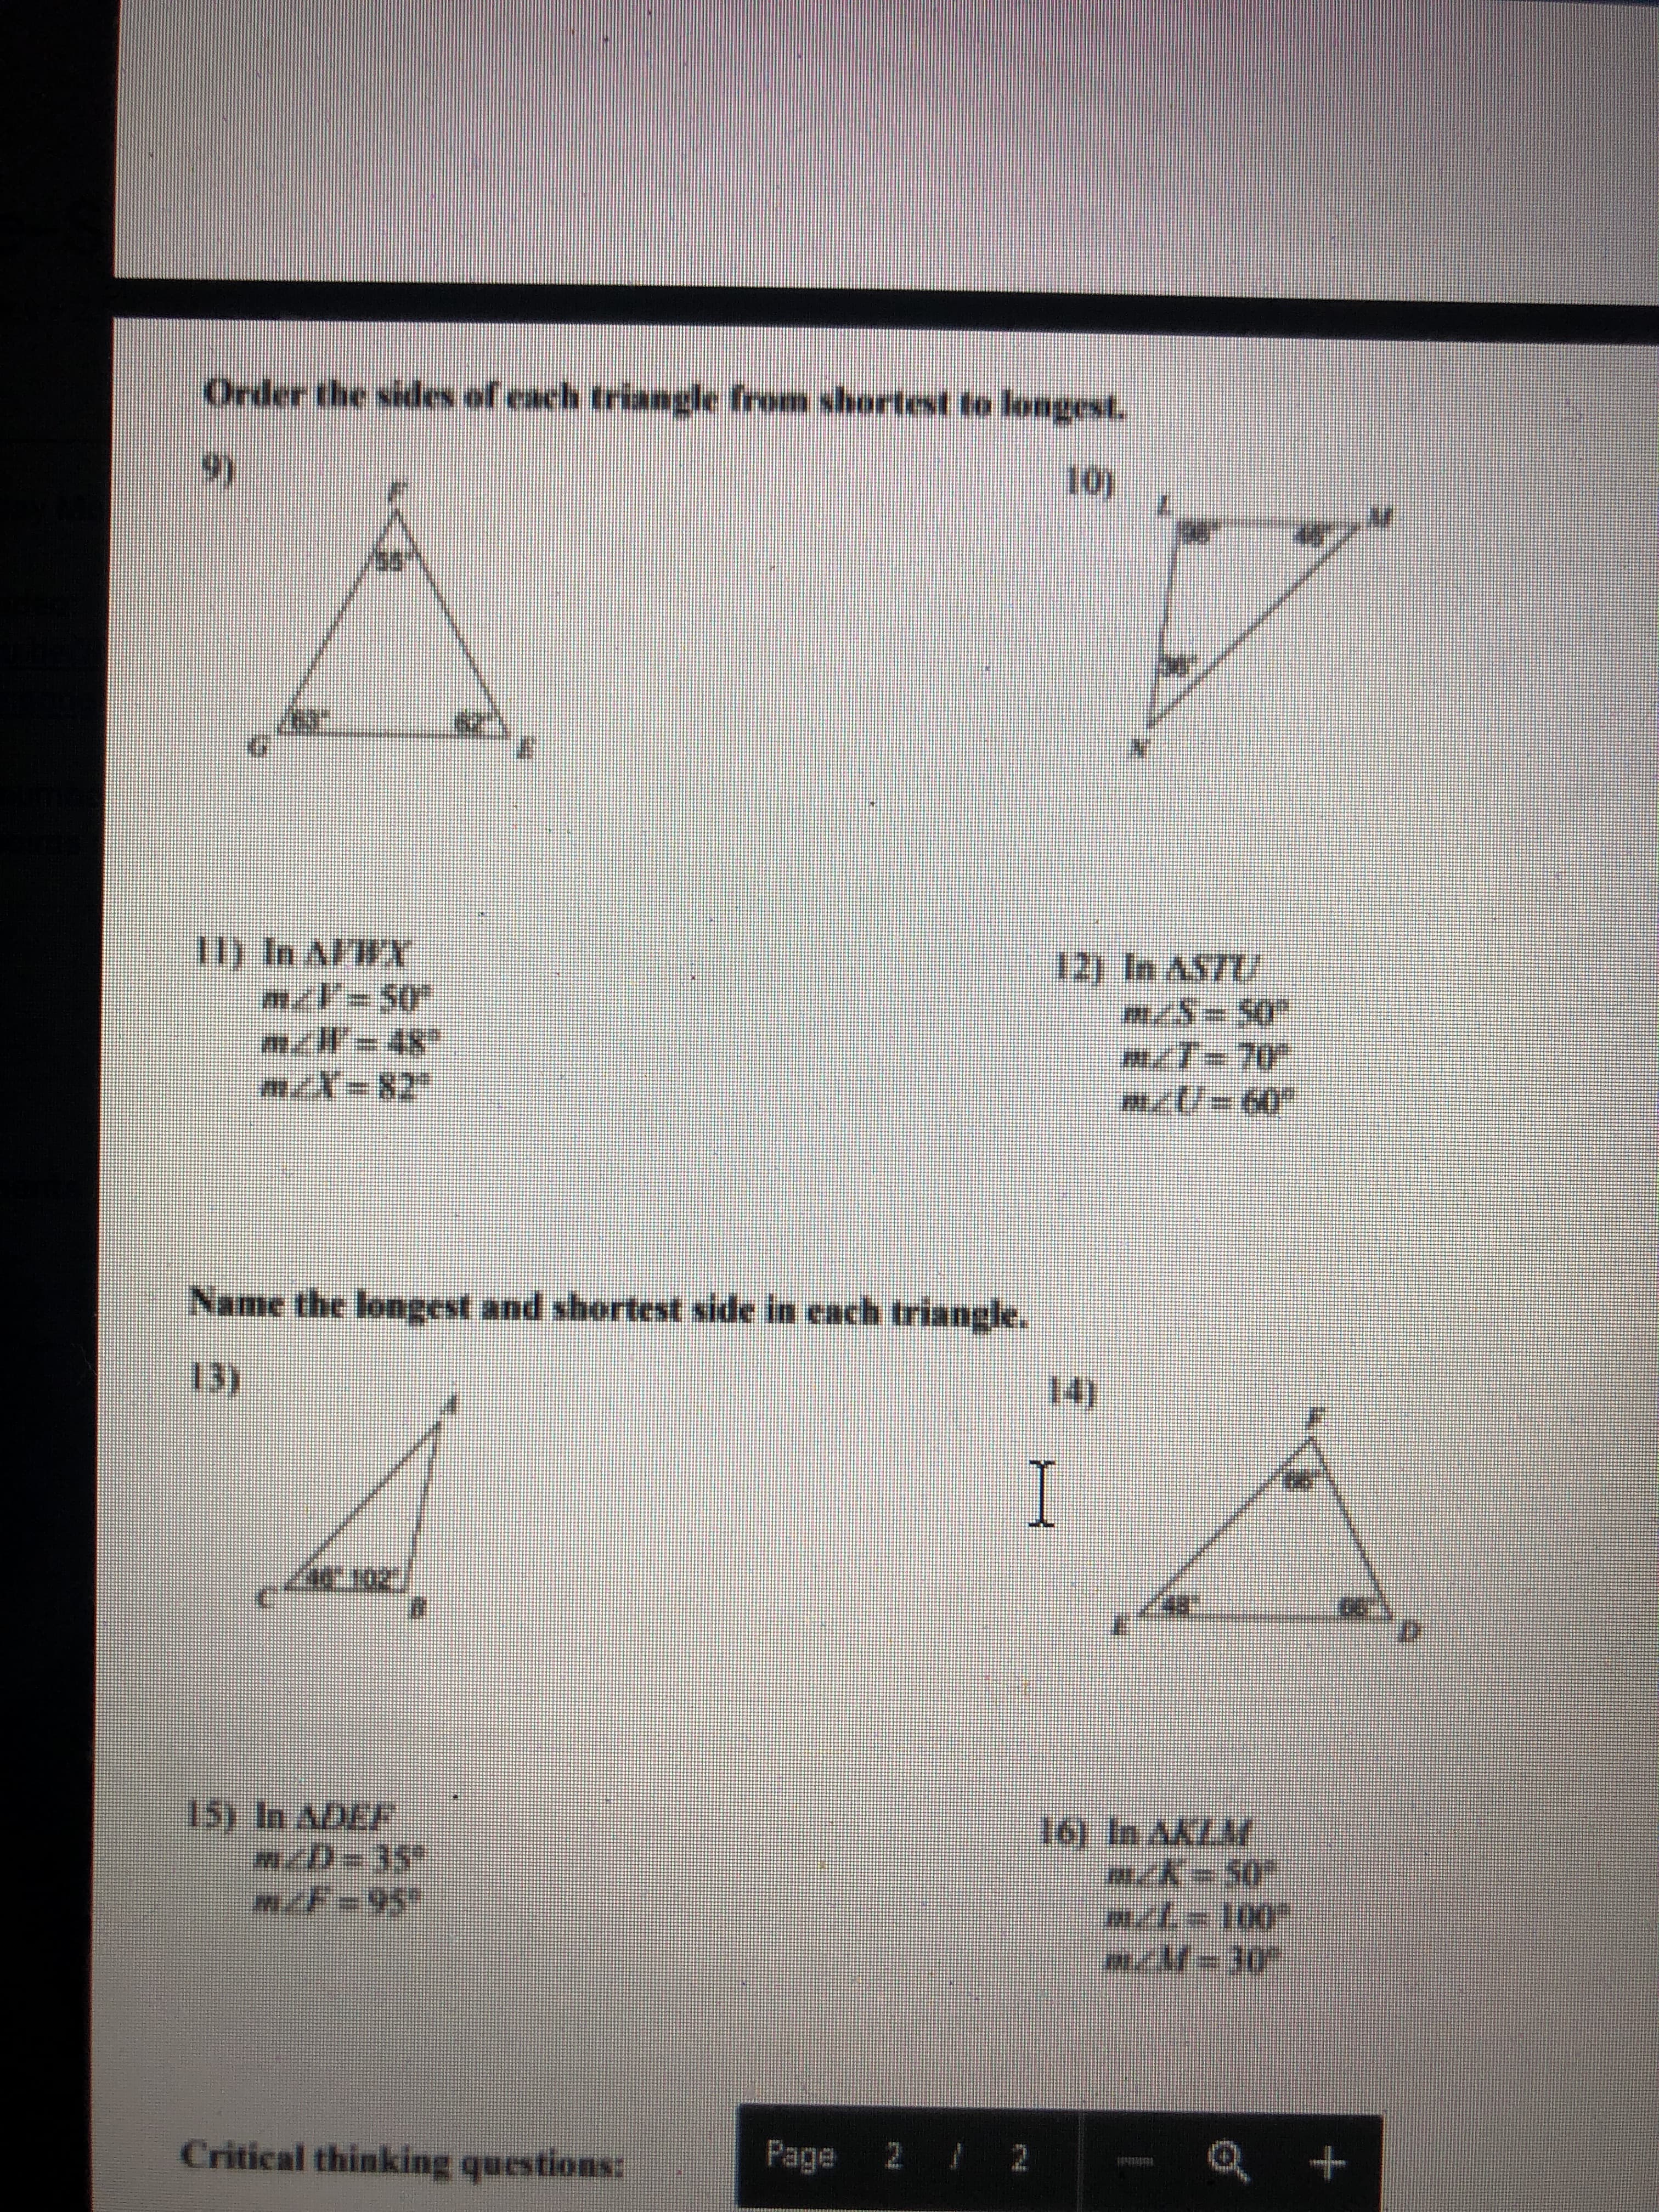 Order the side of each triangle from shortest to longest.
